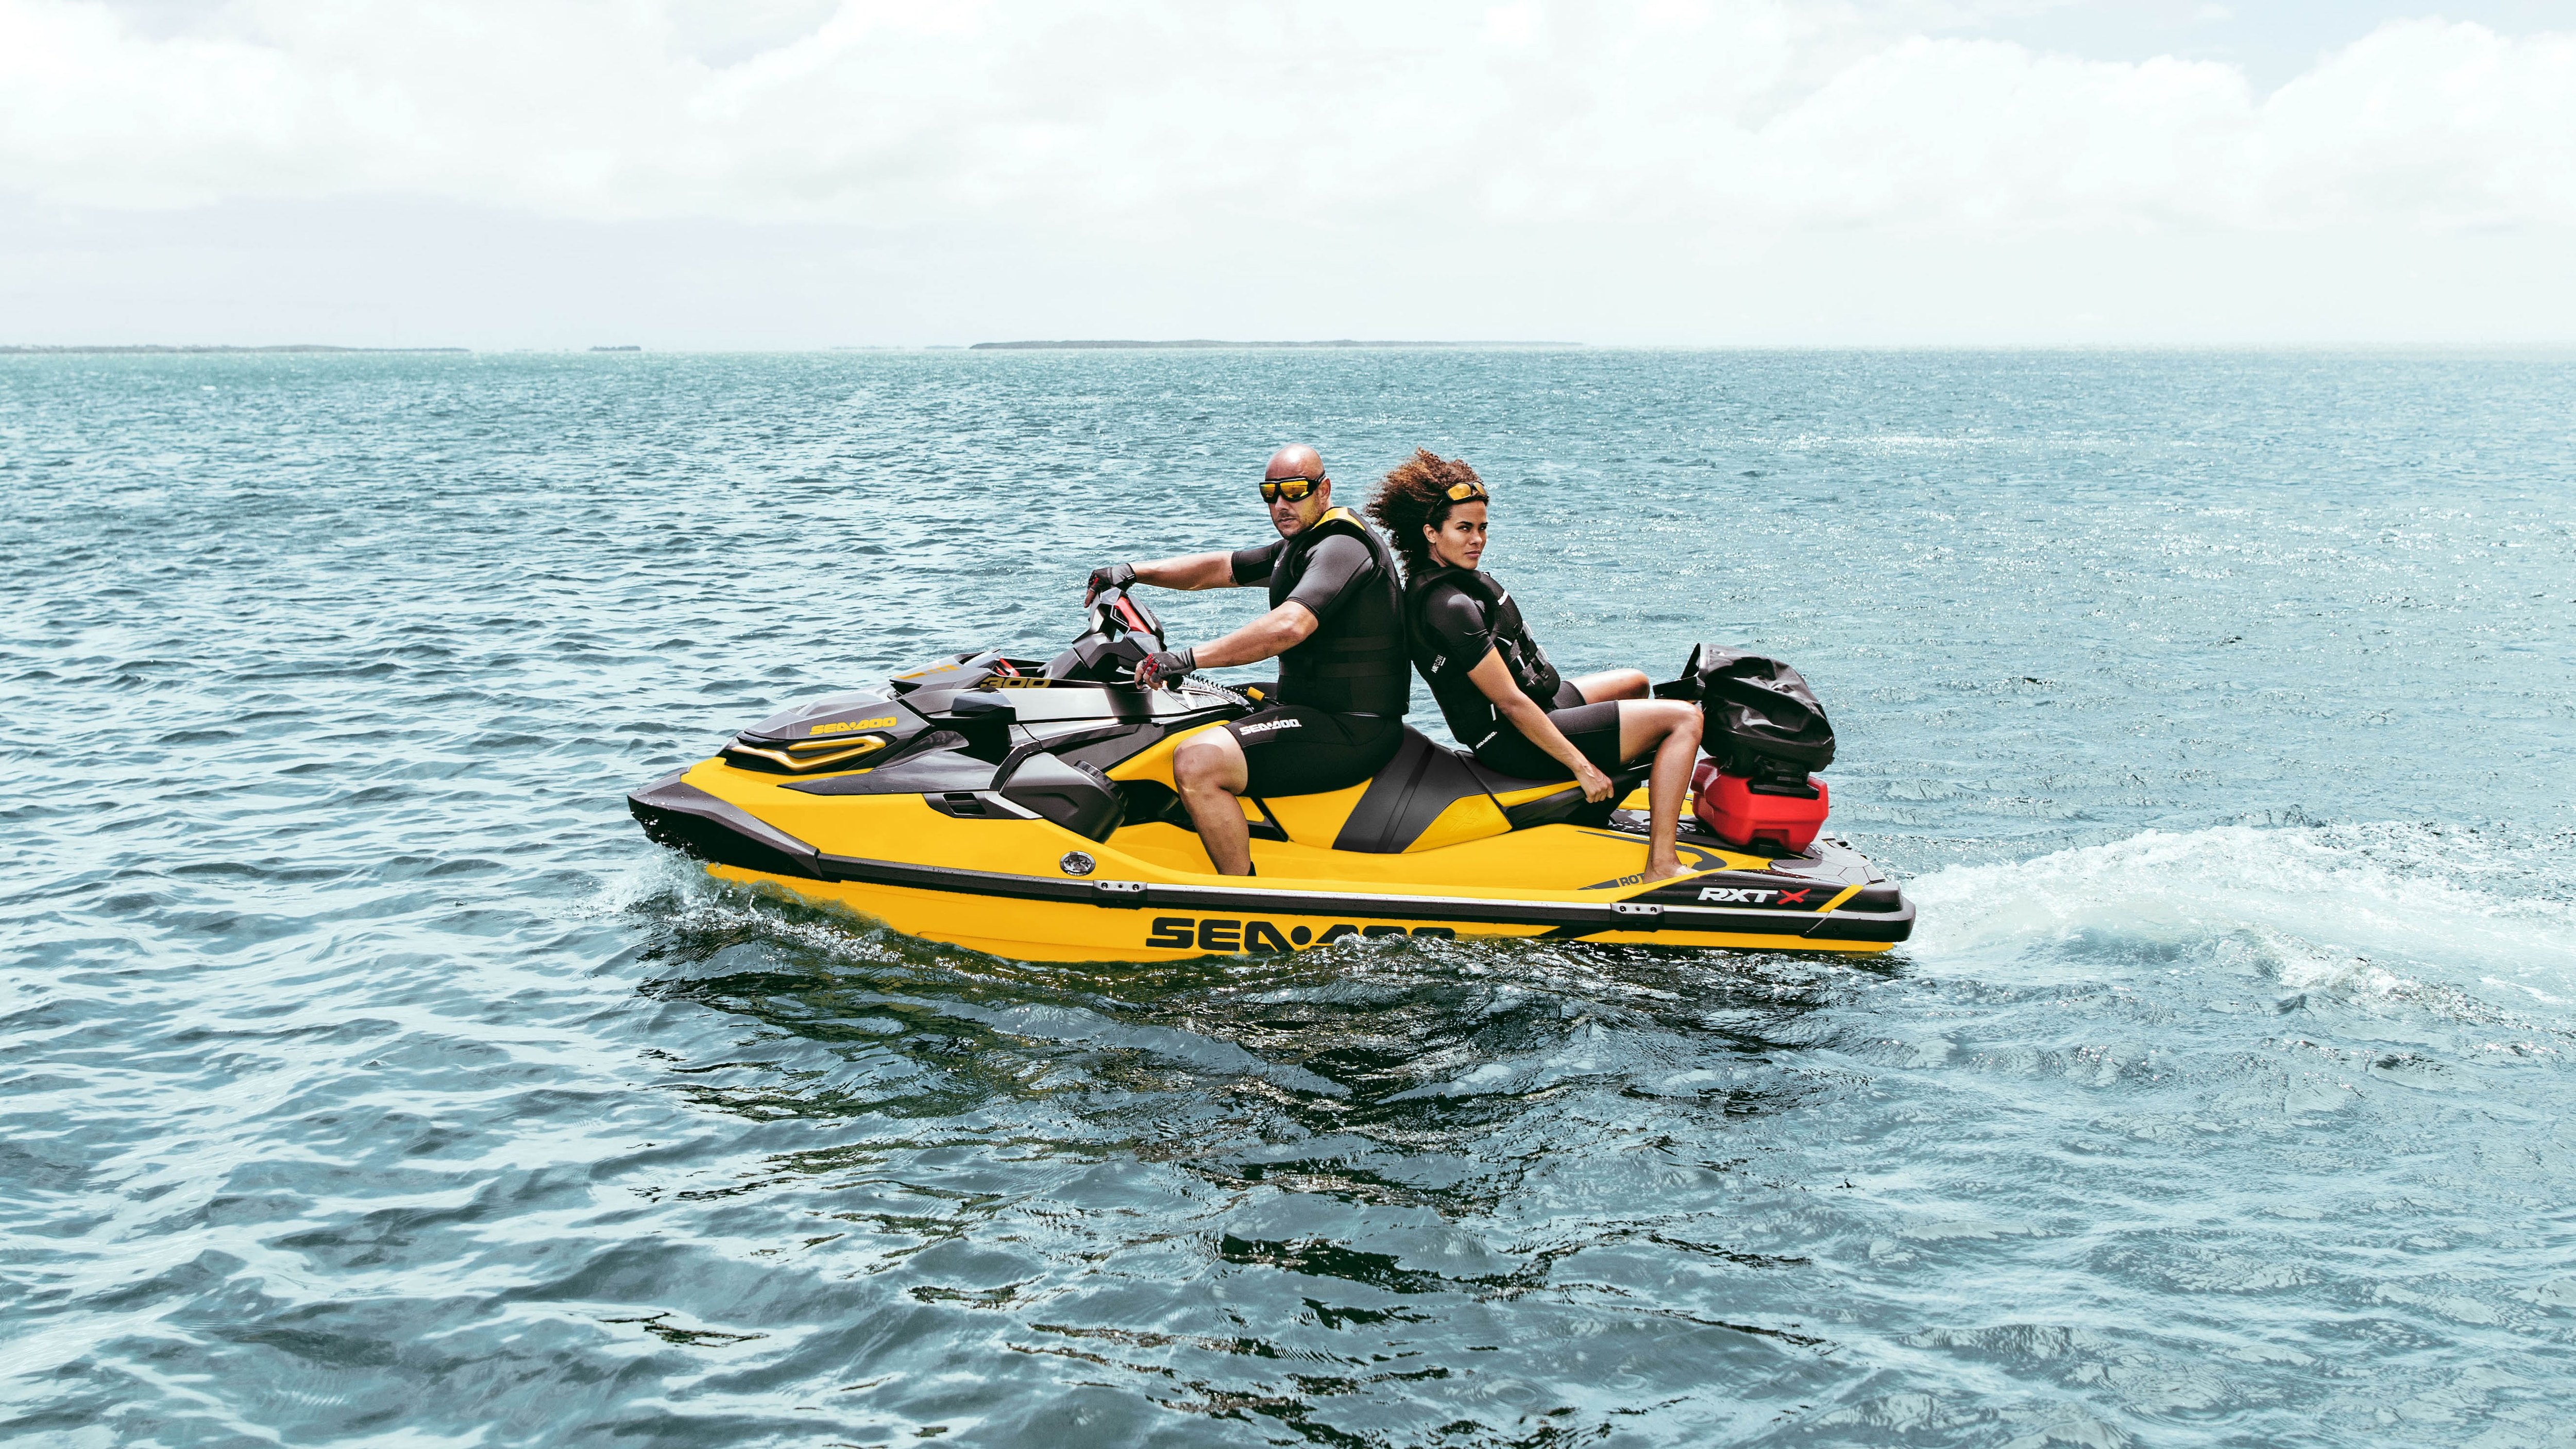 Couple riding a Sea-Doo RXT-X with the Cargo LinQ system